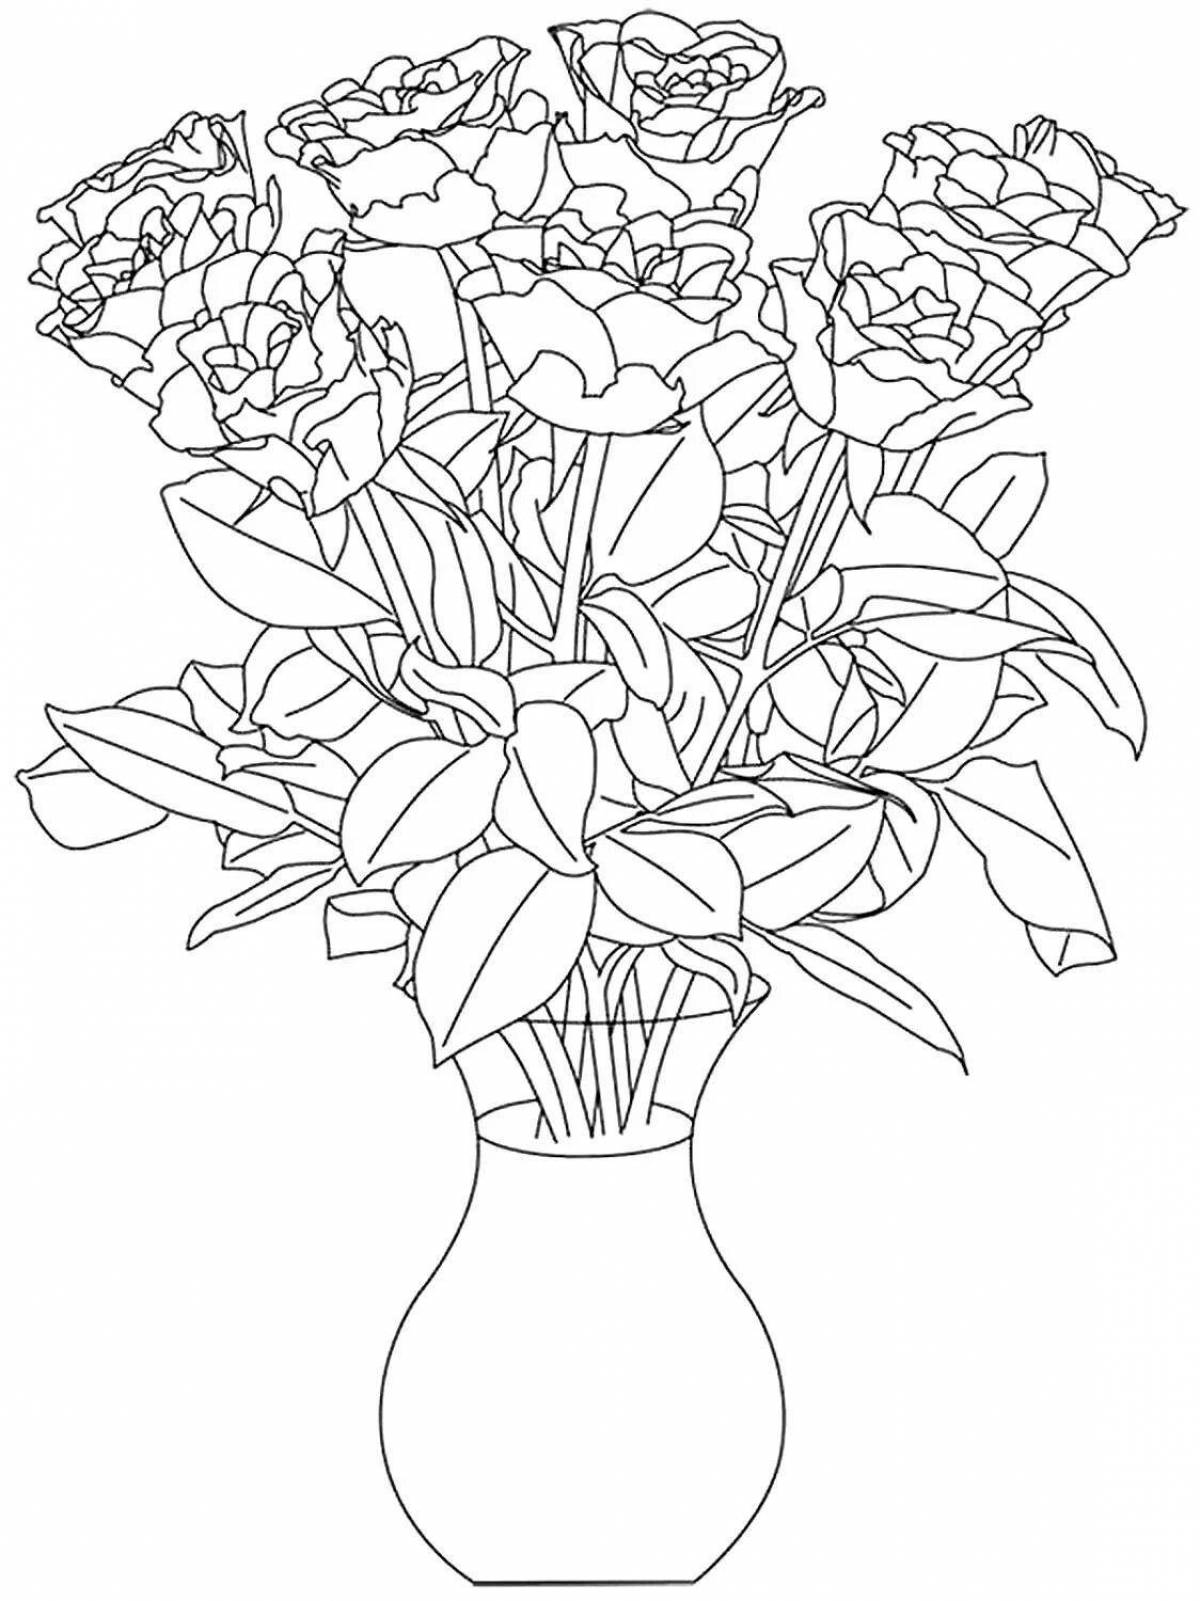 Rainbow flower vase coloring book for kids